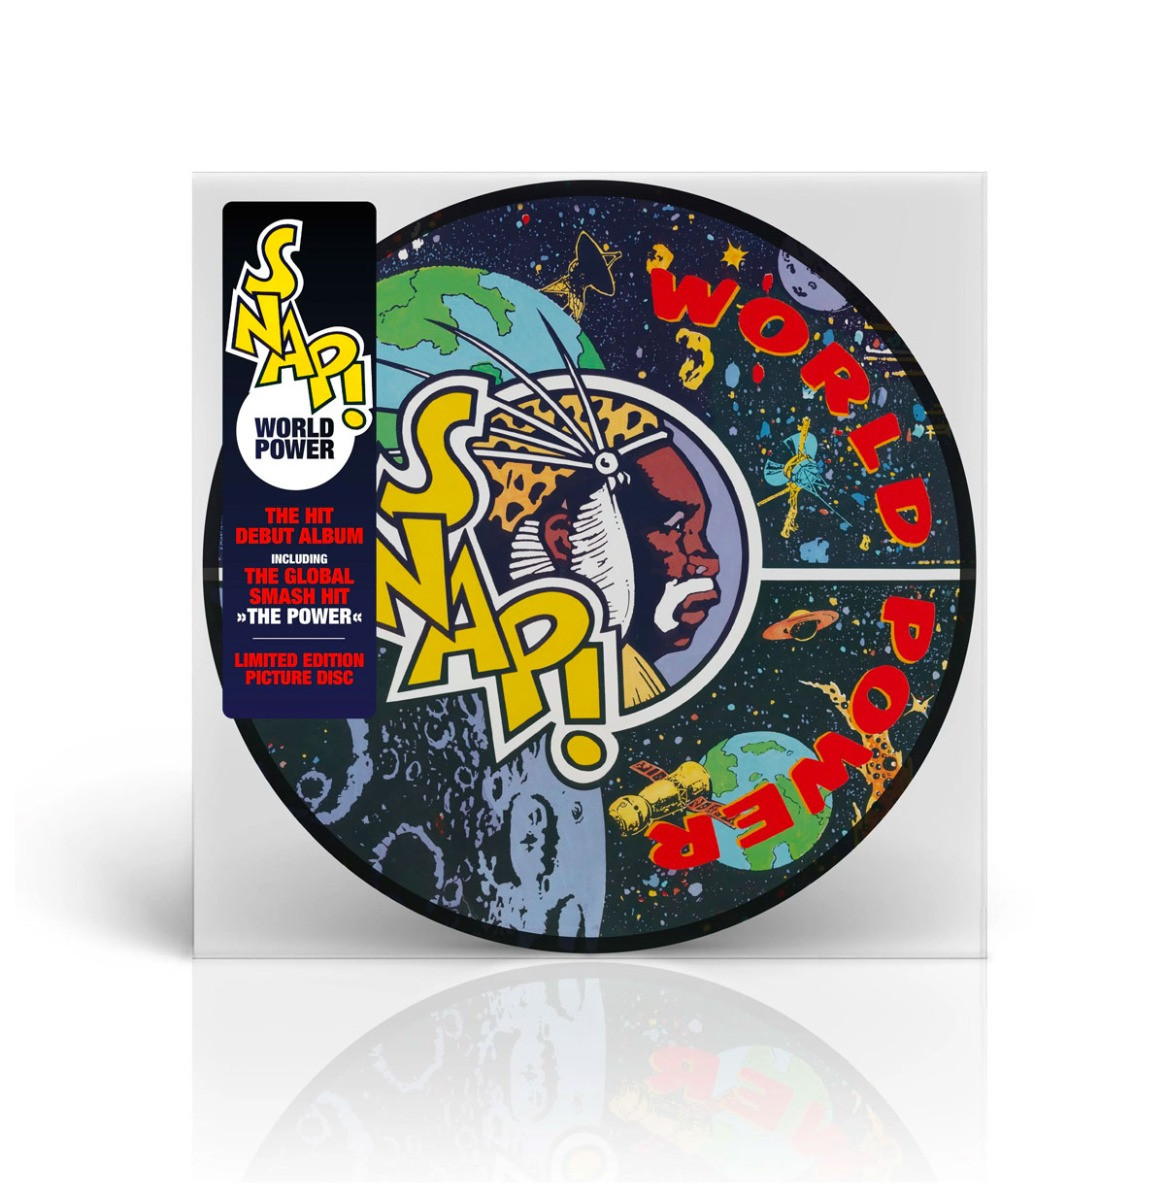 Snap! - World Power (Picture Disc) LP